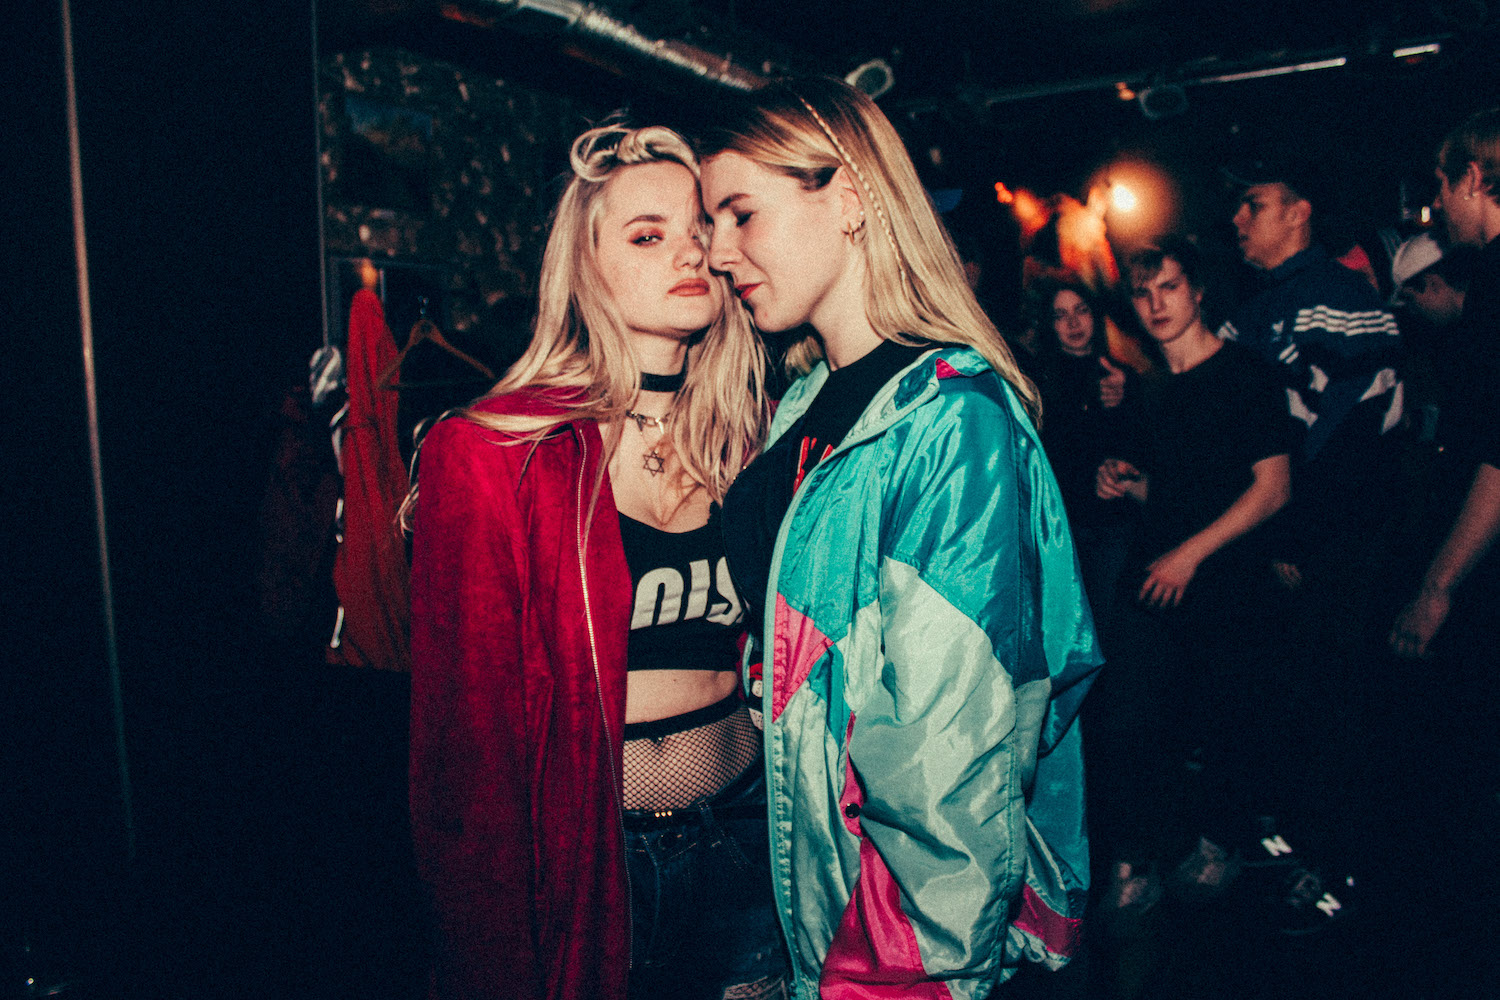 Partygoers at a rave by the Prism collective.  Image: courtesy of Golden Coal 